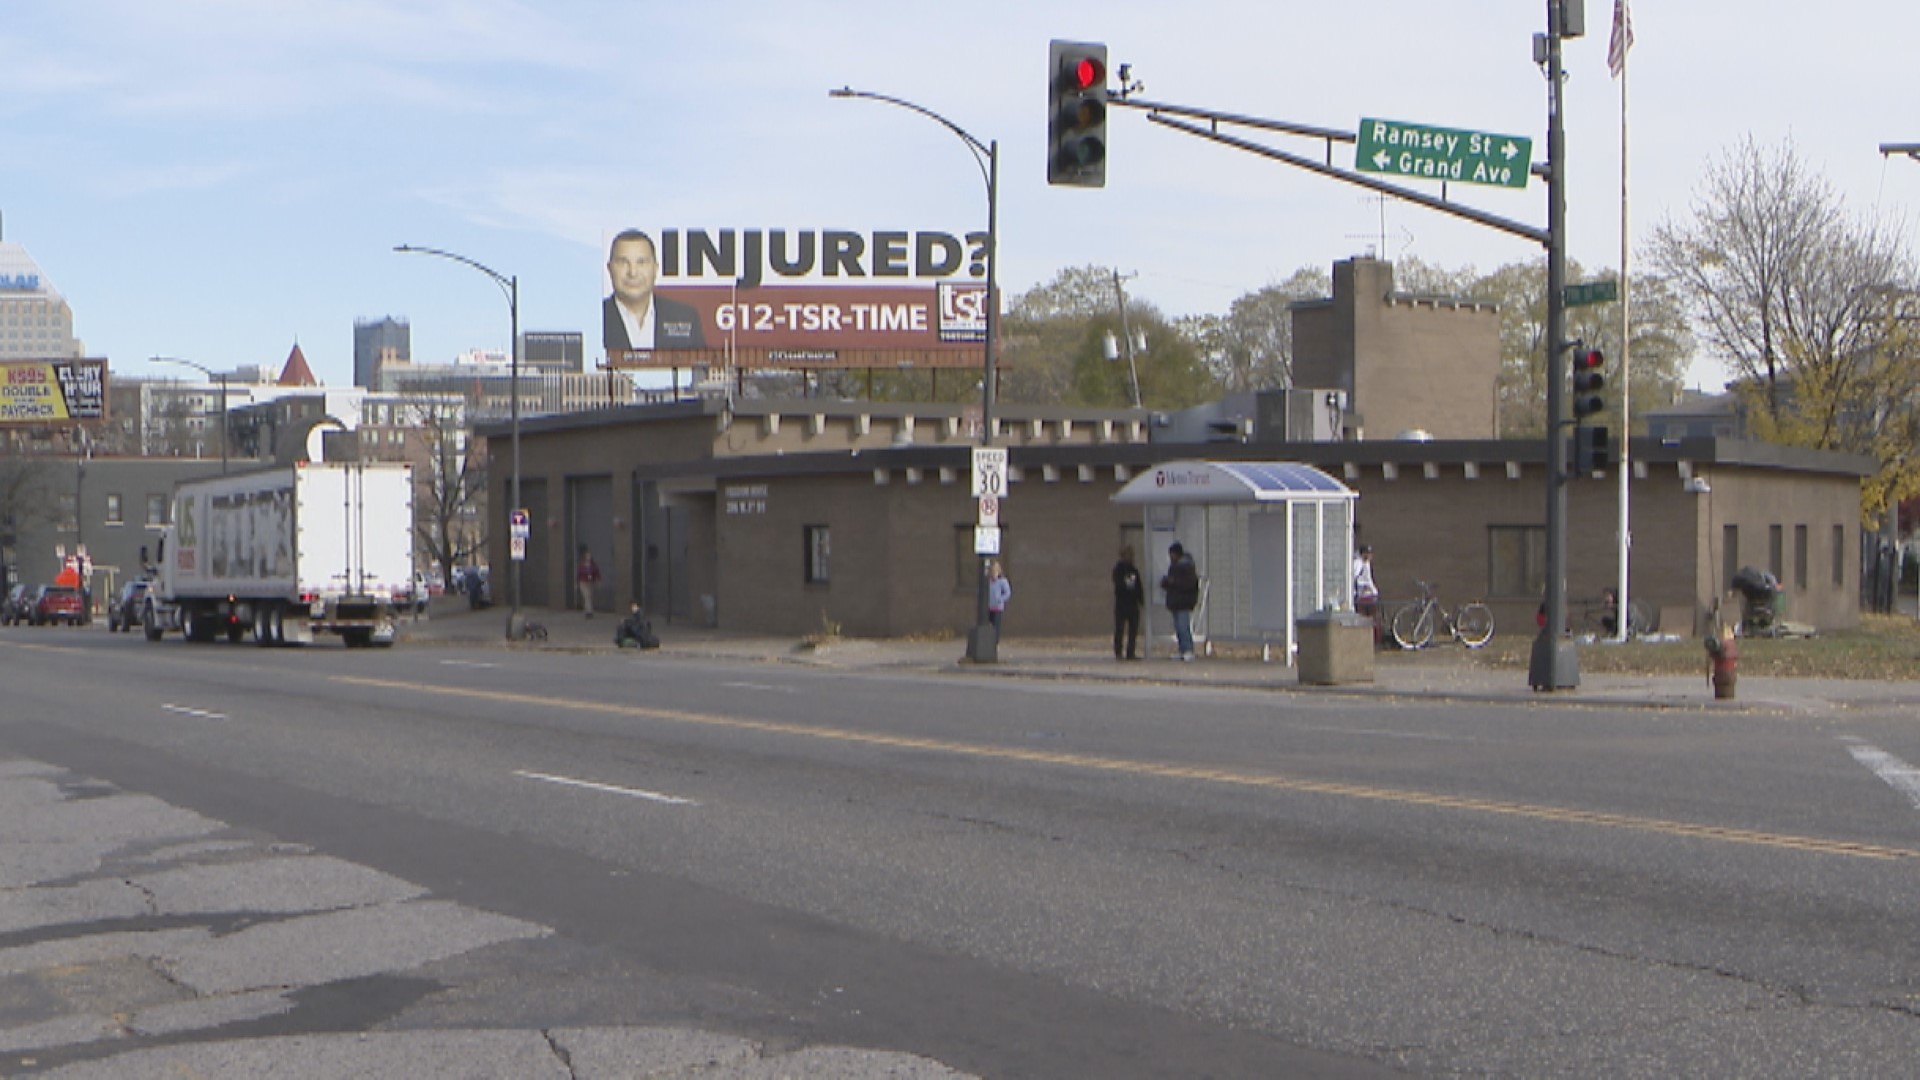 The city council will discuss zoning requirements that could lead to more homeless shelters. Meanwhile, the city is dealing with a lawsuit over an existing shelter.